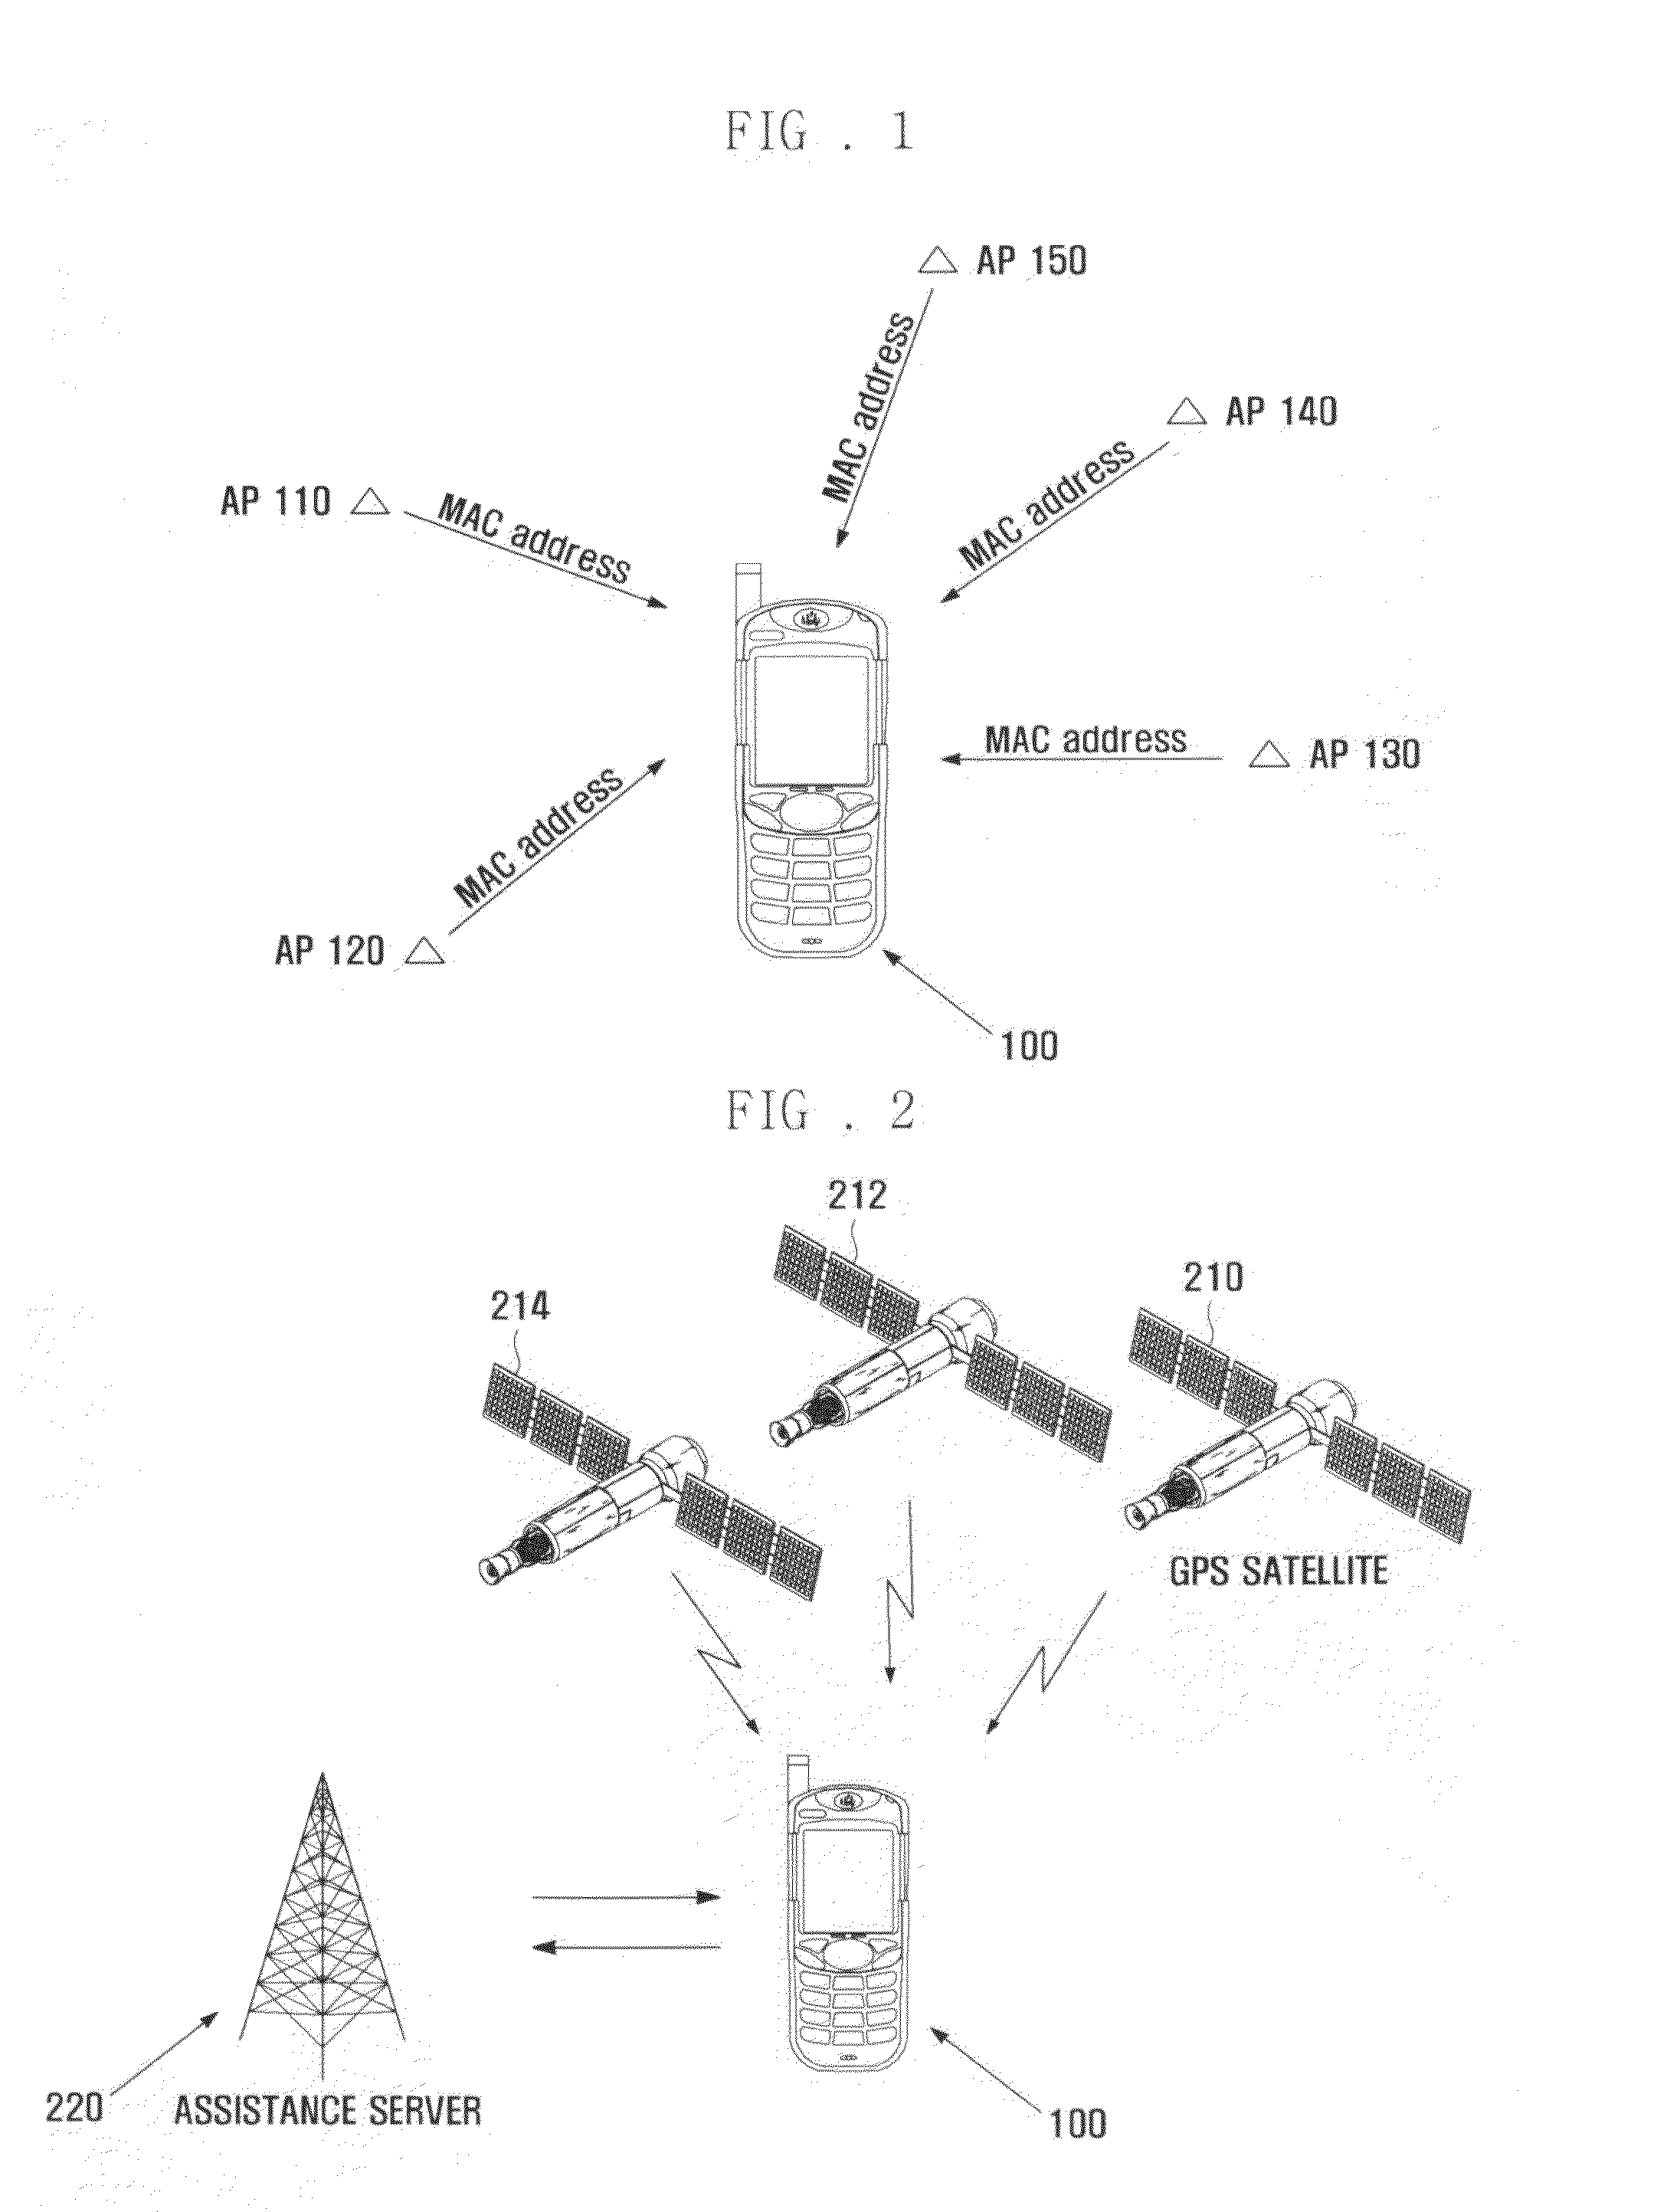 Method for connecting to wireless LAN access point and apparatus using the same